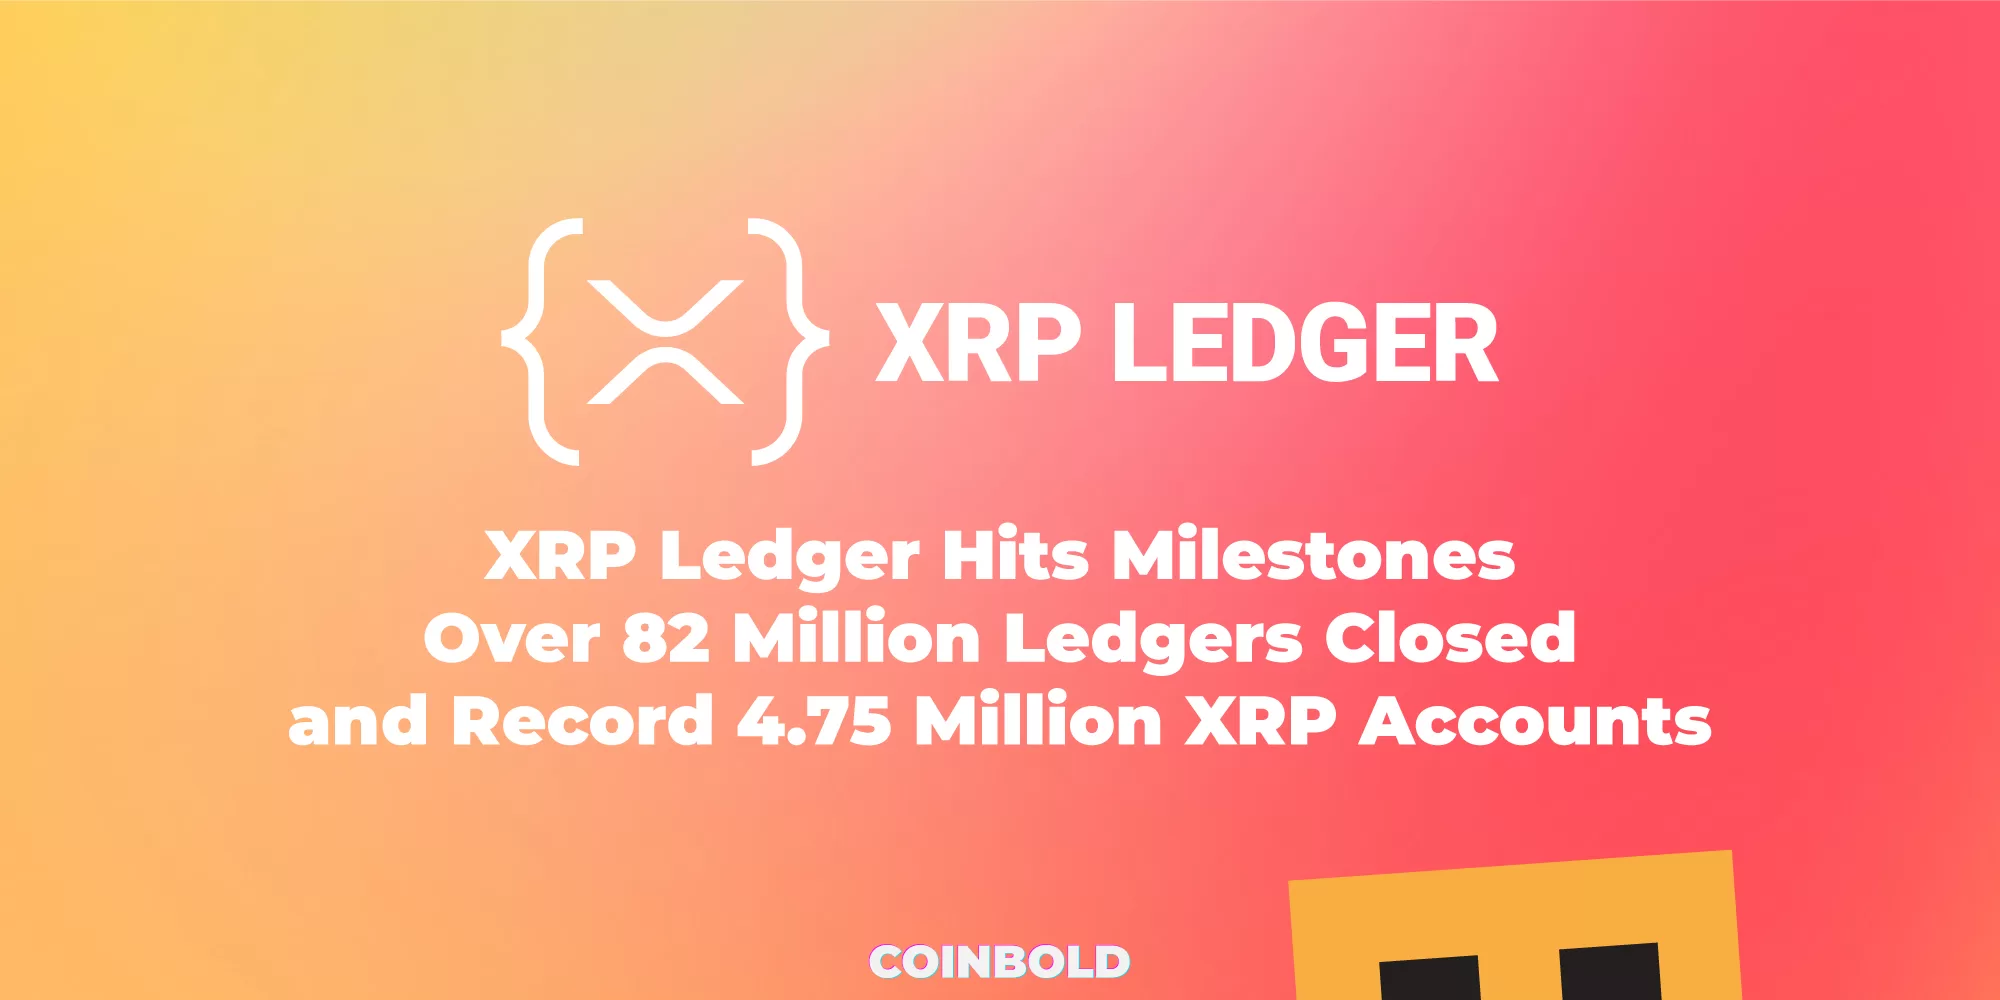 XRP Ledger Hits Milestones Over 82 Million Ledgers Closed and Record 4.75 Million XRP Accounts